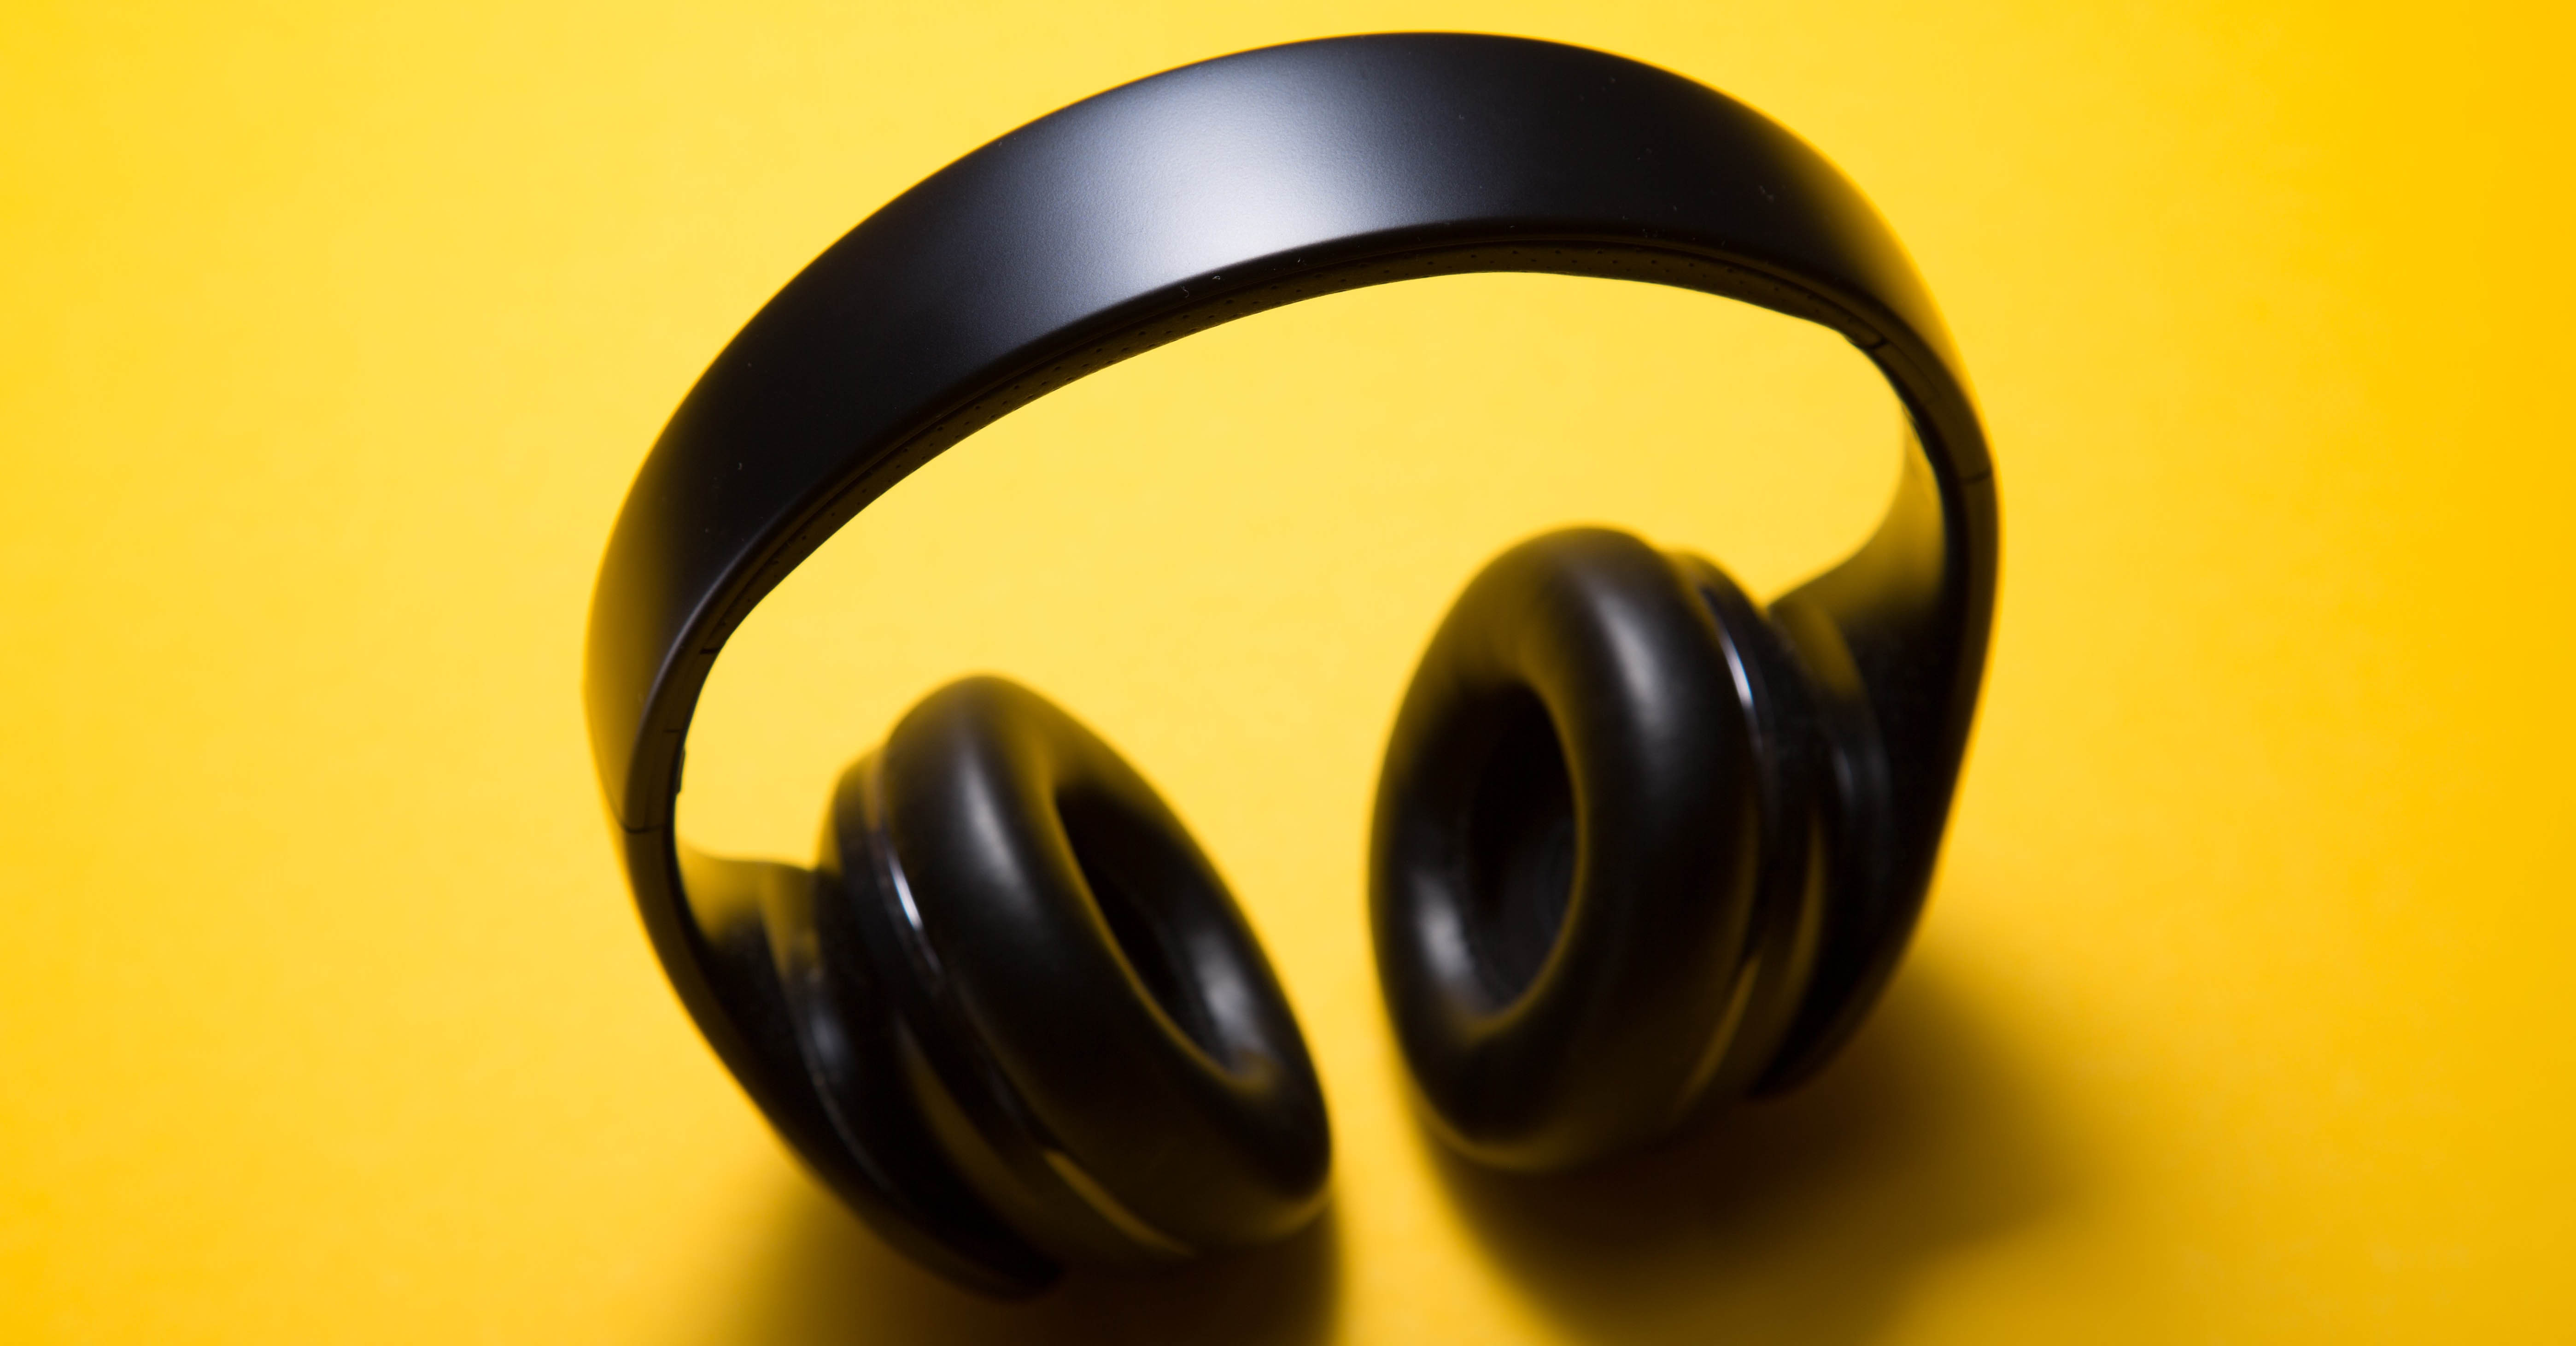 A pair of over-the-ear headphones on a yellow background.